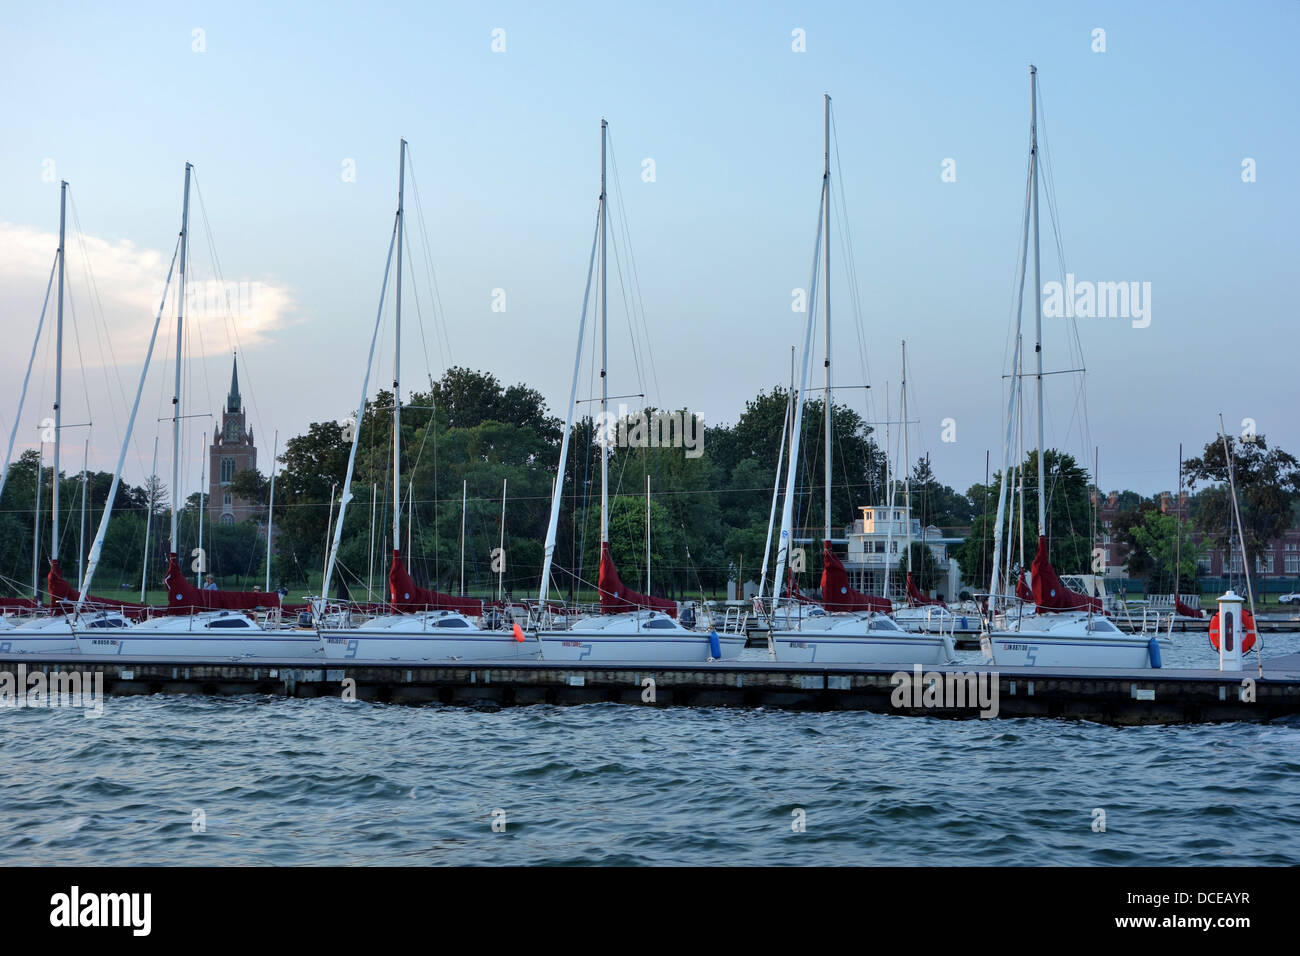 Sail boats of the Culver Academies in Culver Indiana USA on a summer evening. Stock Photo